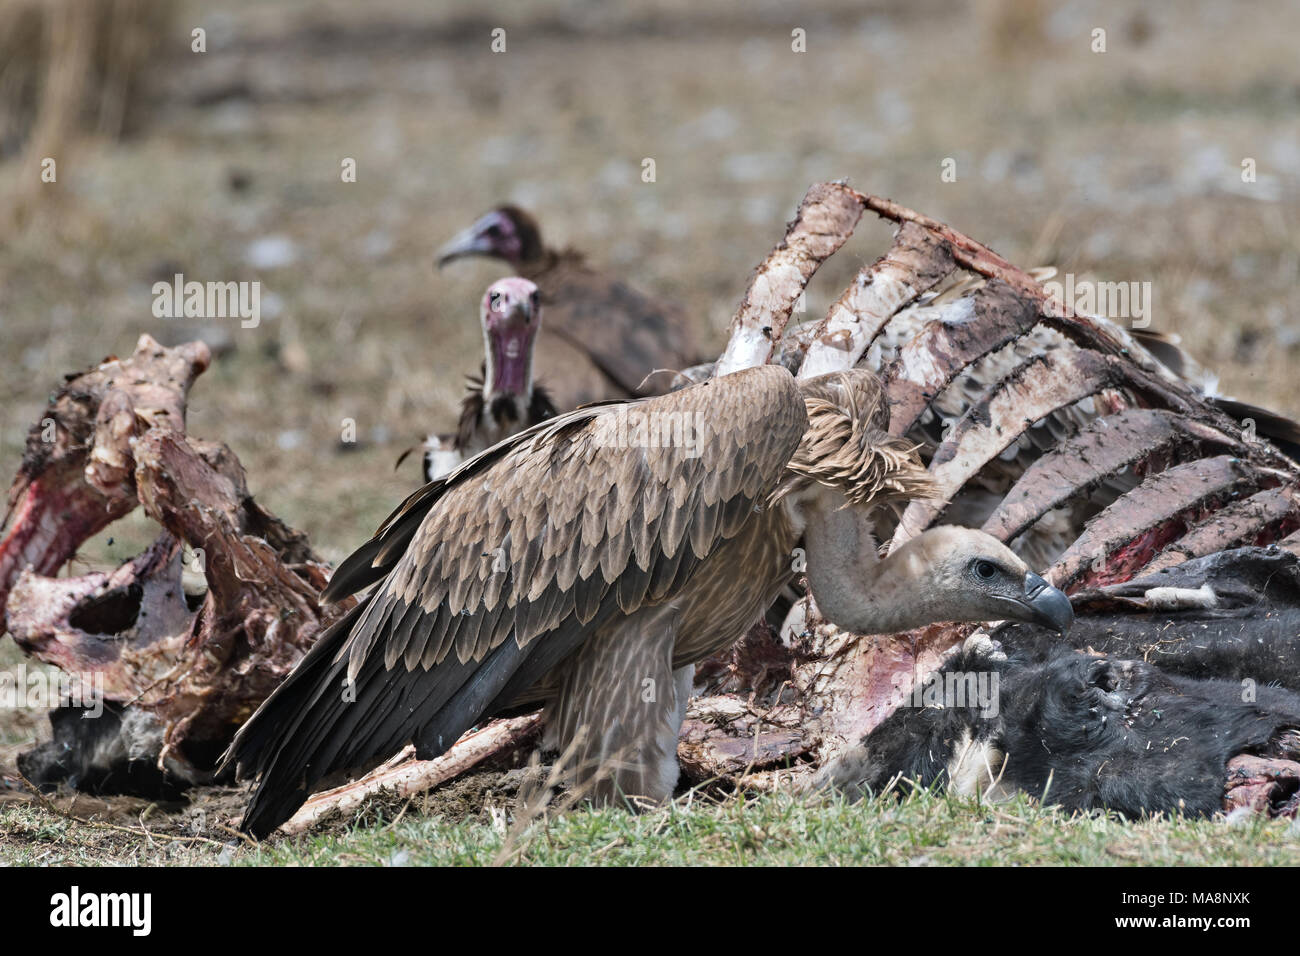 Vultures on a cow's carcass, Ethiopia Stock Photo